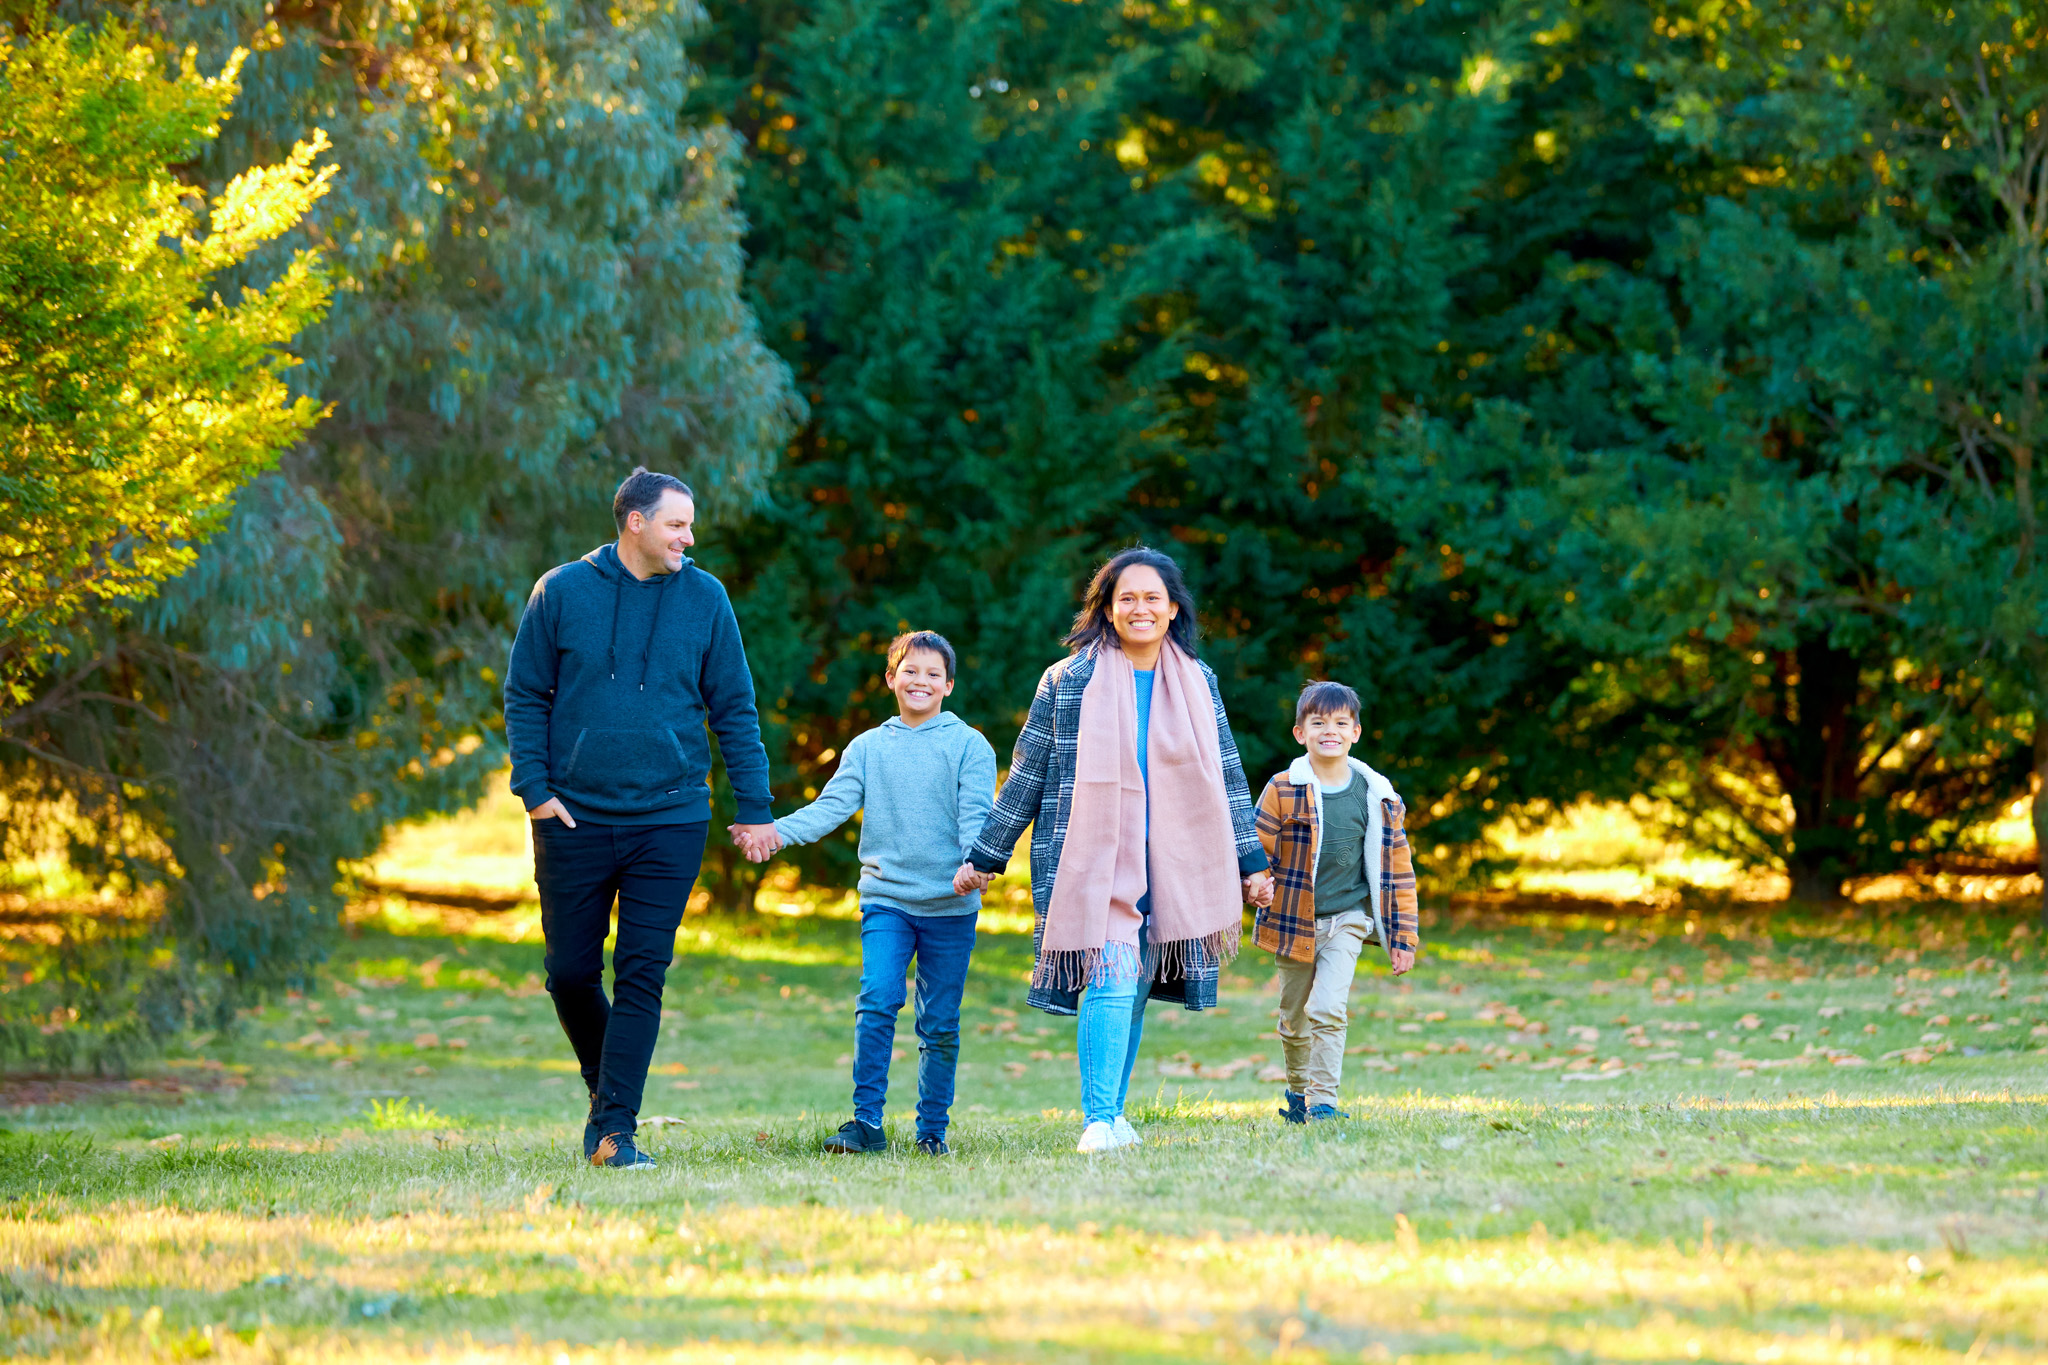 Photograph of family walking holding hands in Canberra